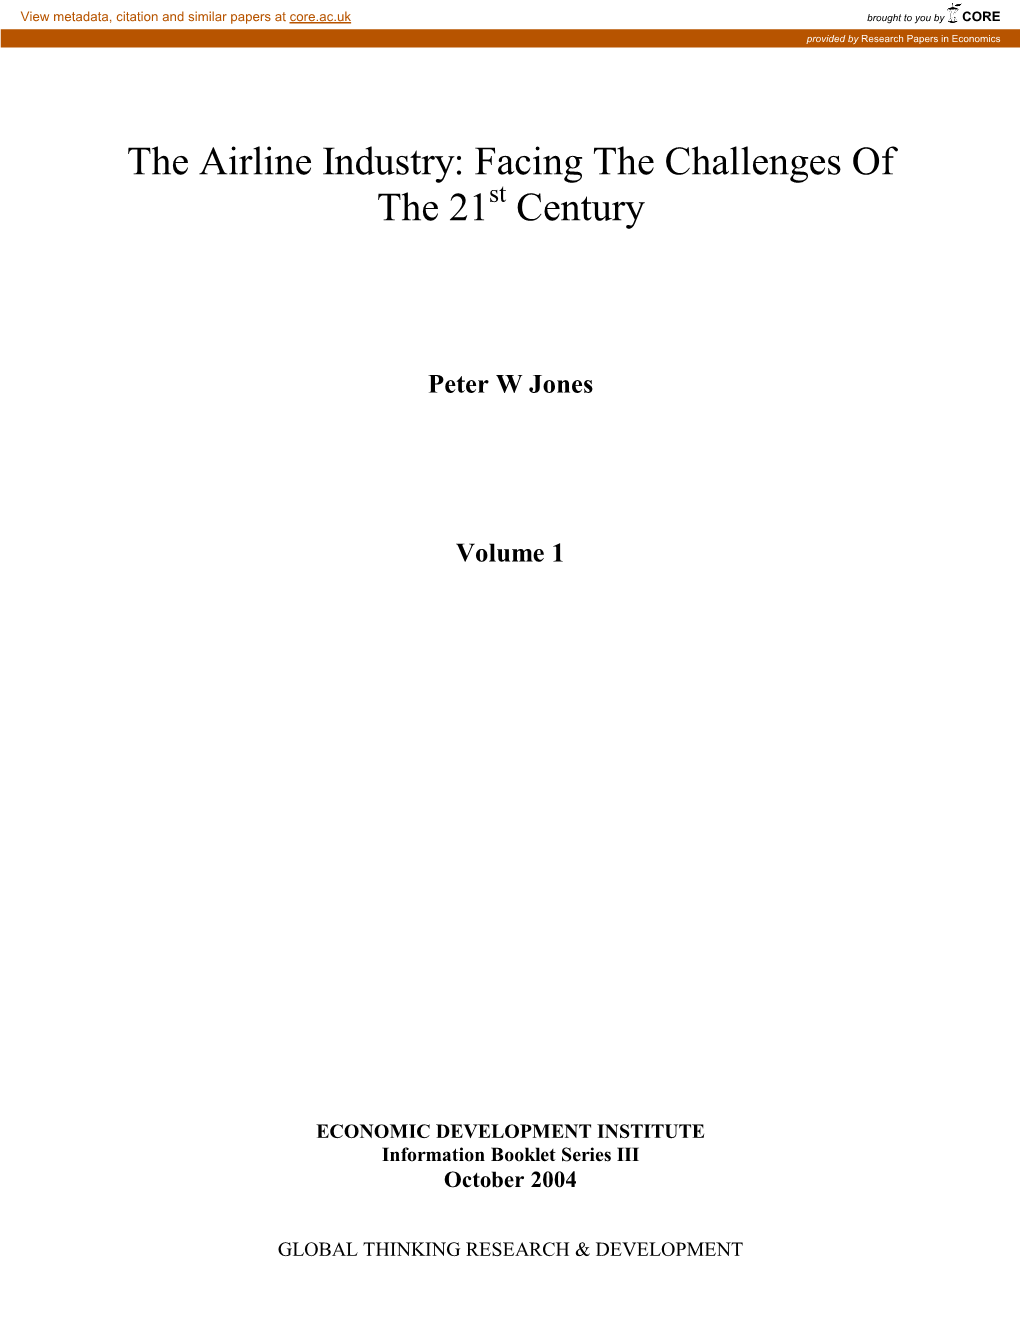 The Airline Industry: Facing the Challenges of the 21St Century